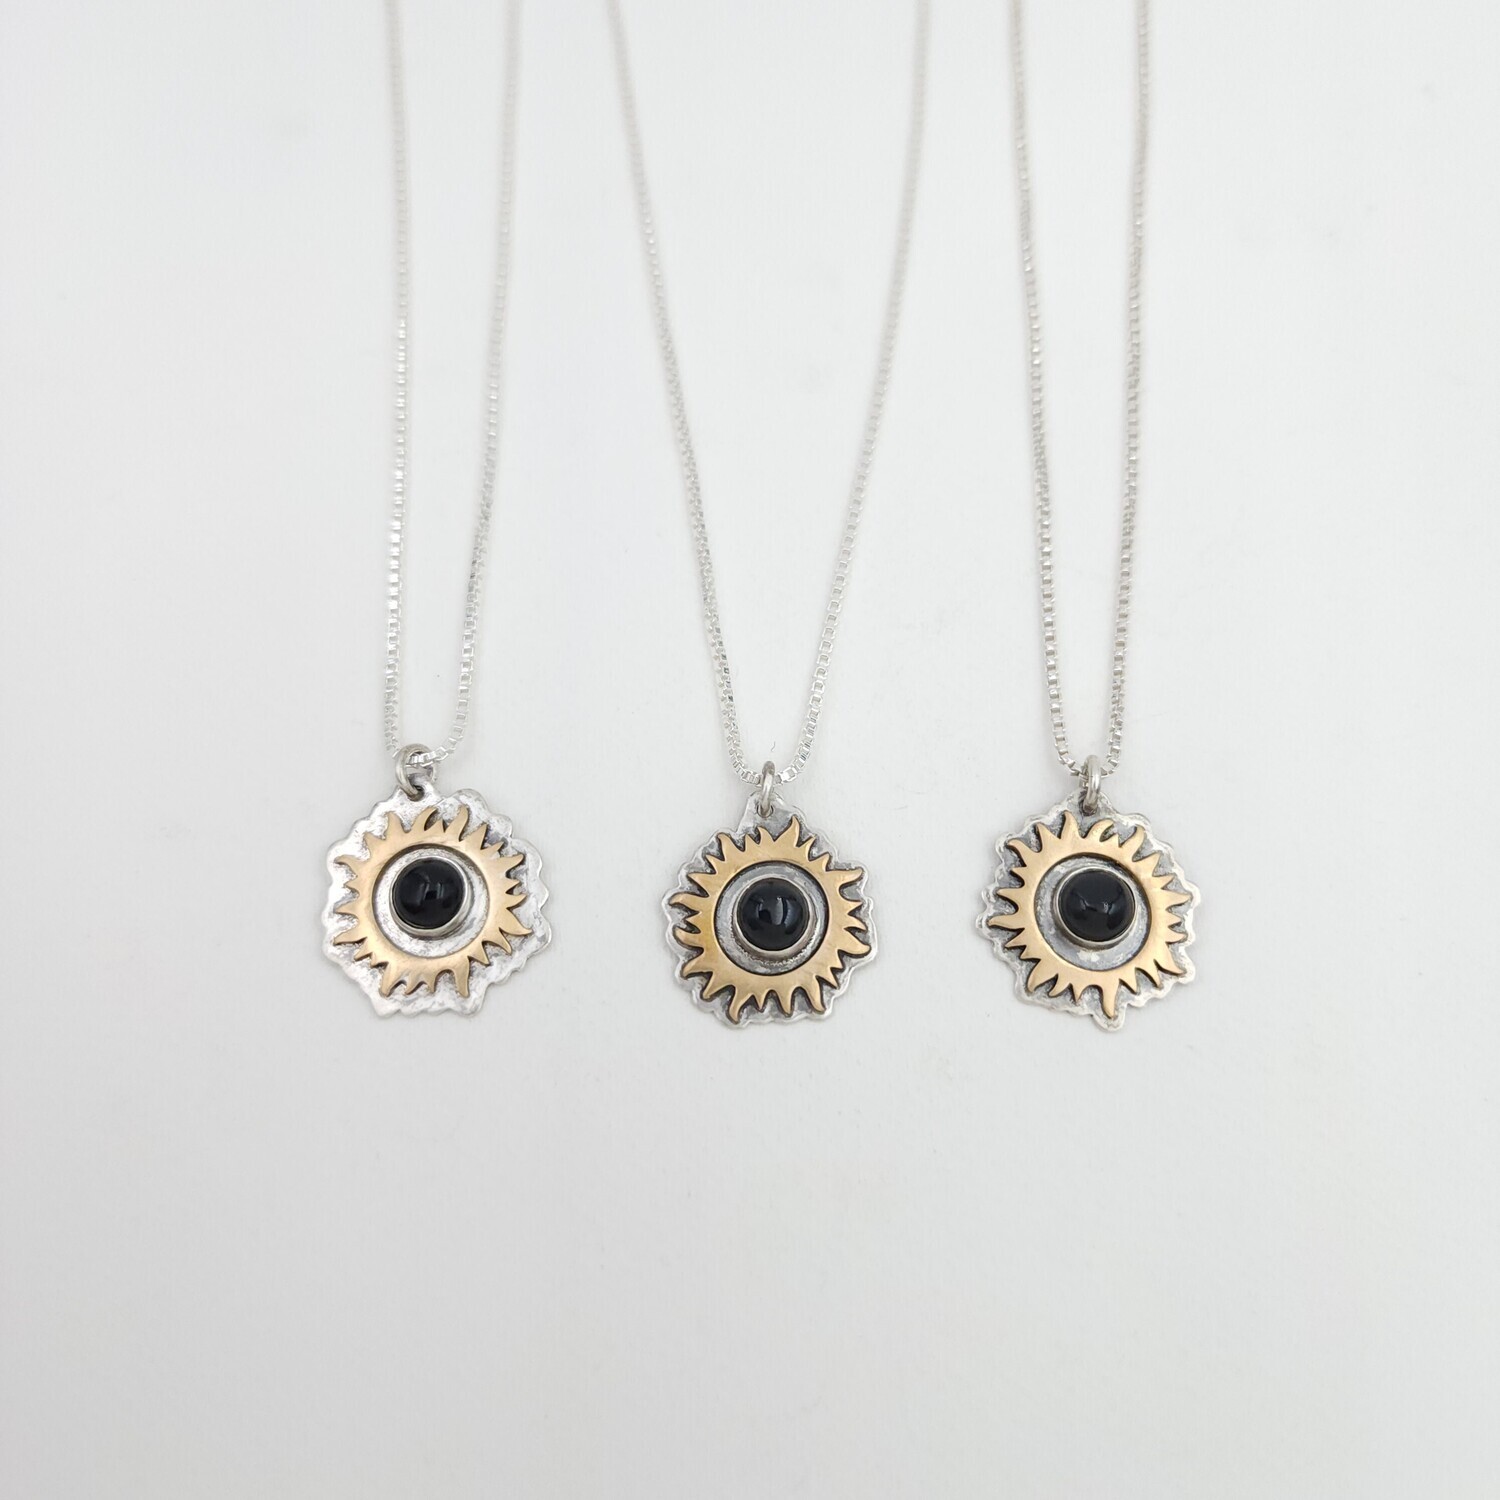 Eclipse Necklace with Black Onyx Cabochon and Bronze Sun